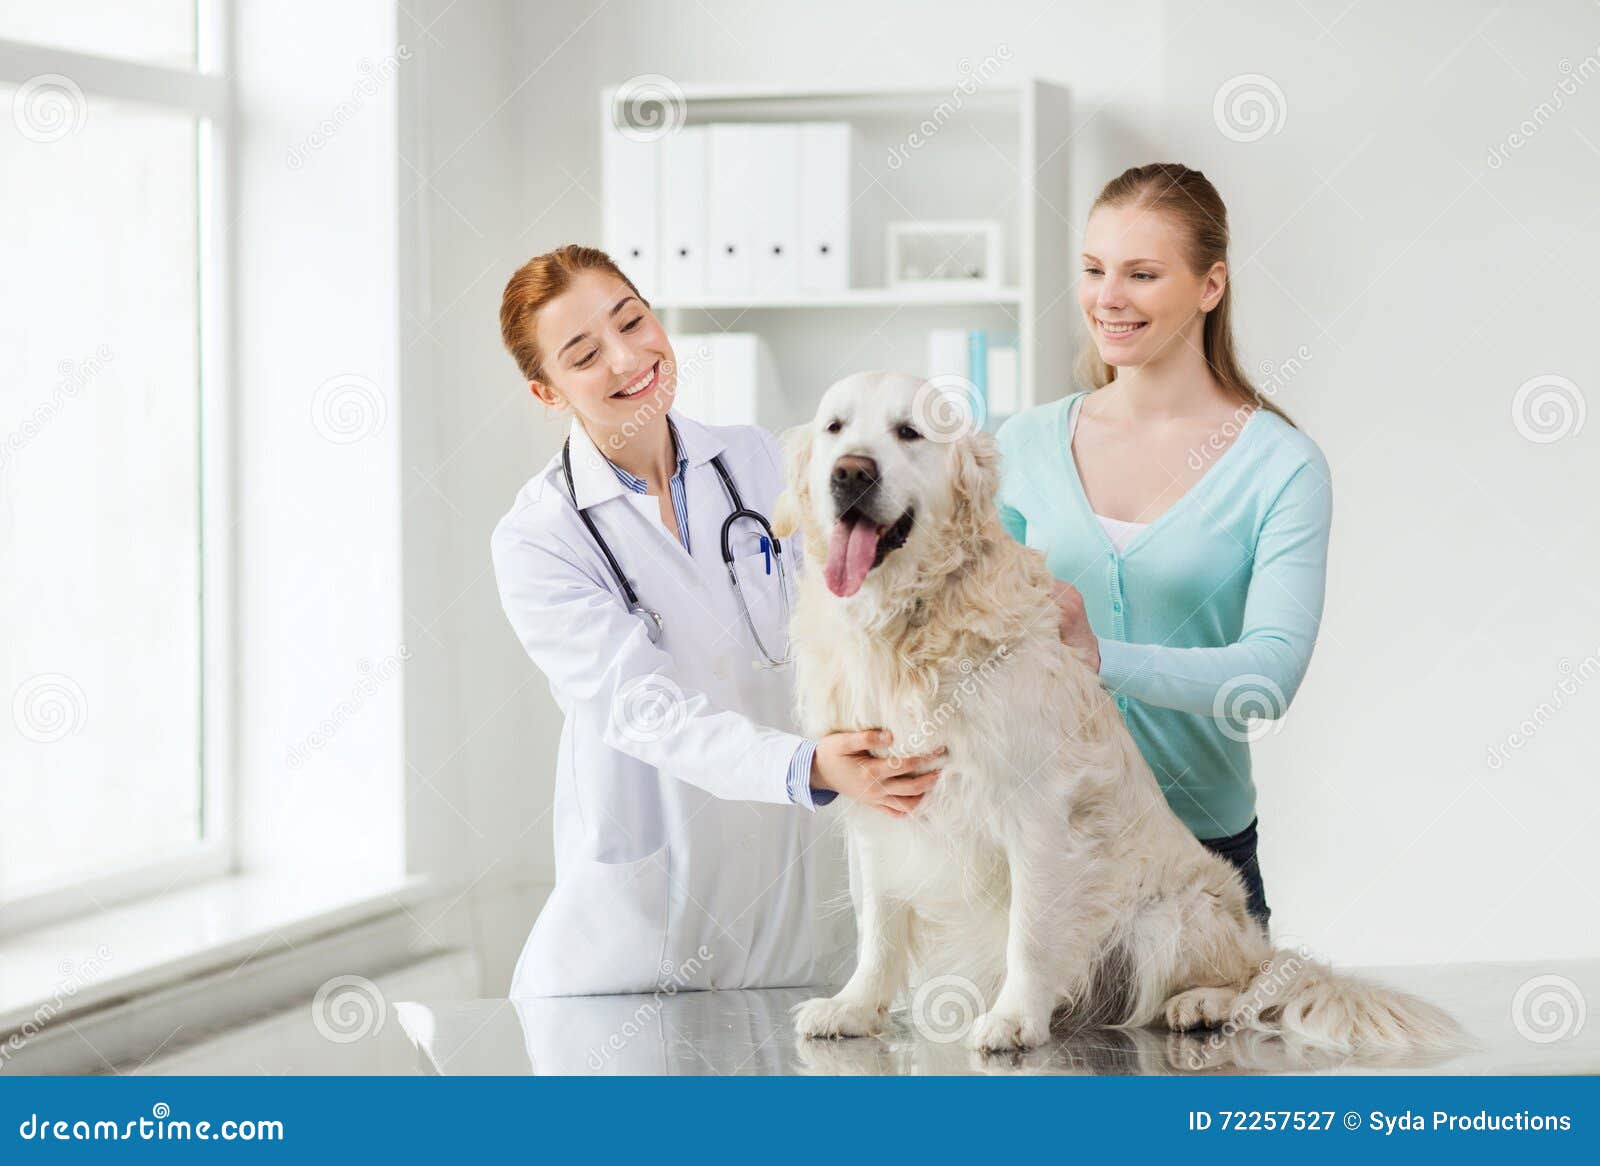 Happy Woman with Dog and Doctor at Vet Clinic Stock Image - Image of  medicine, expertise: 72257527